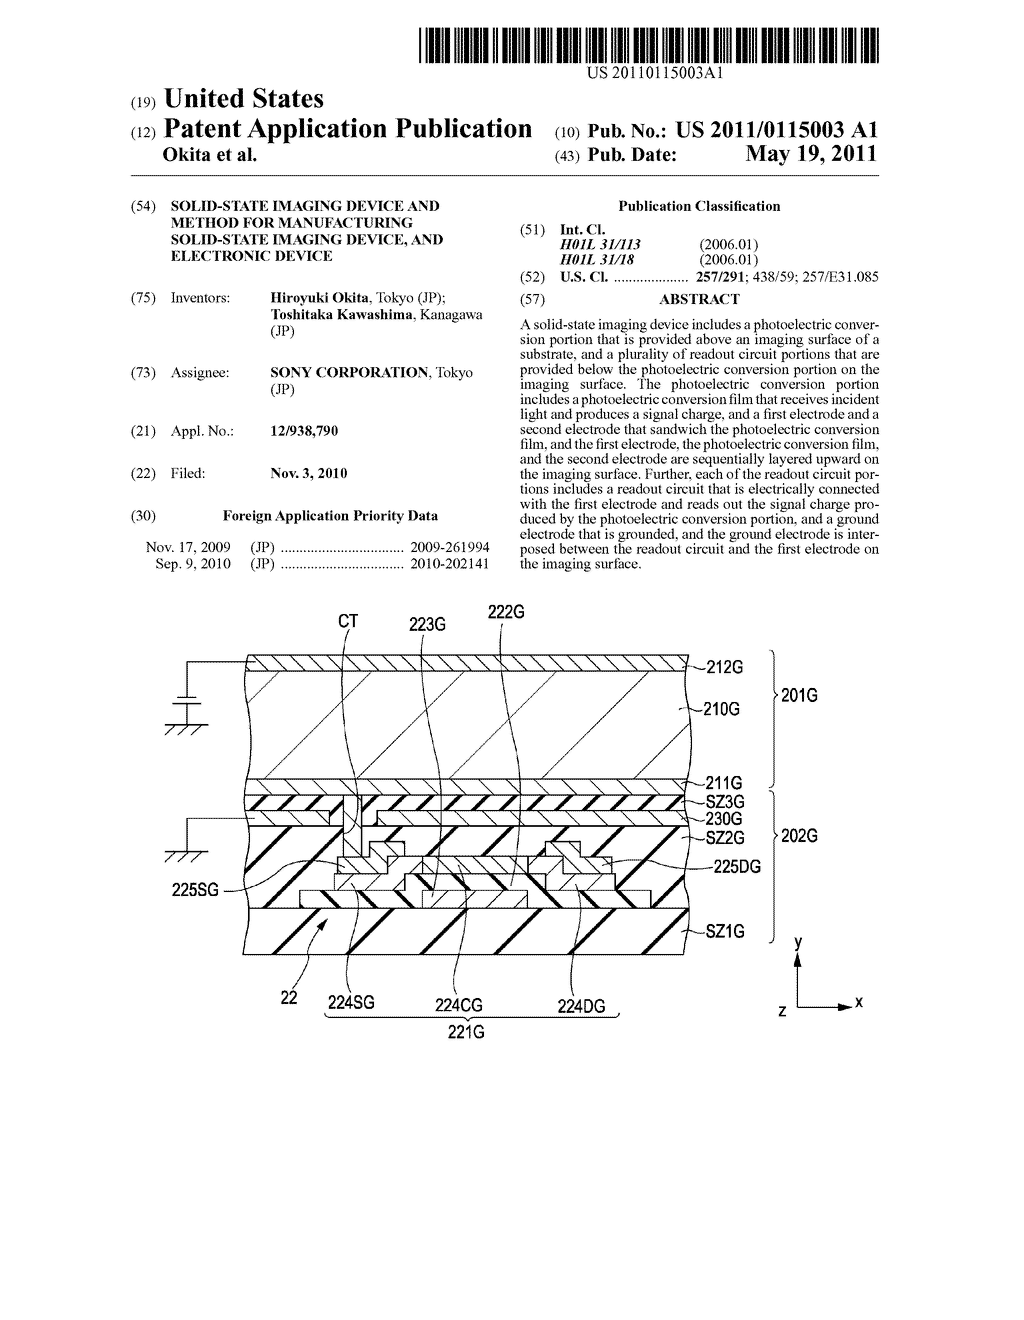 SOLID-STATE IMAGING DEVICE AND METHOD FOR MANUFACTURING SOLID-STATE IMAGING DEVICE, AND ELECTRONIC DEVICE - diagram, schematic, and image 01